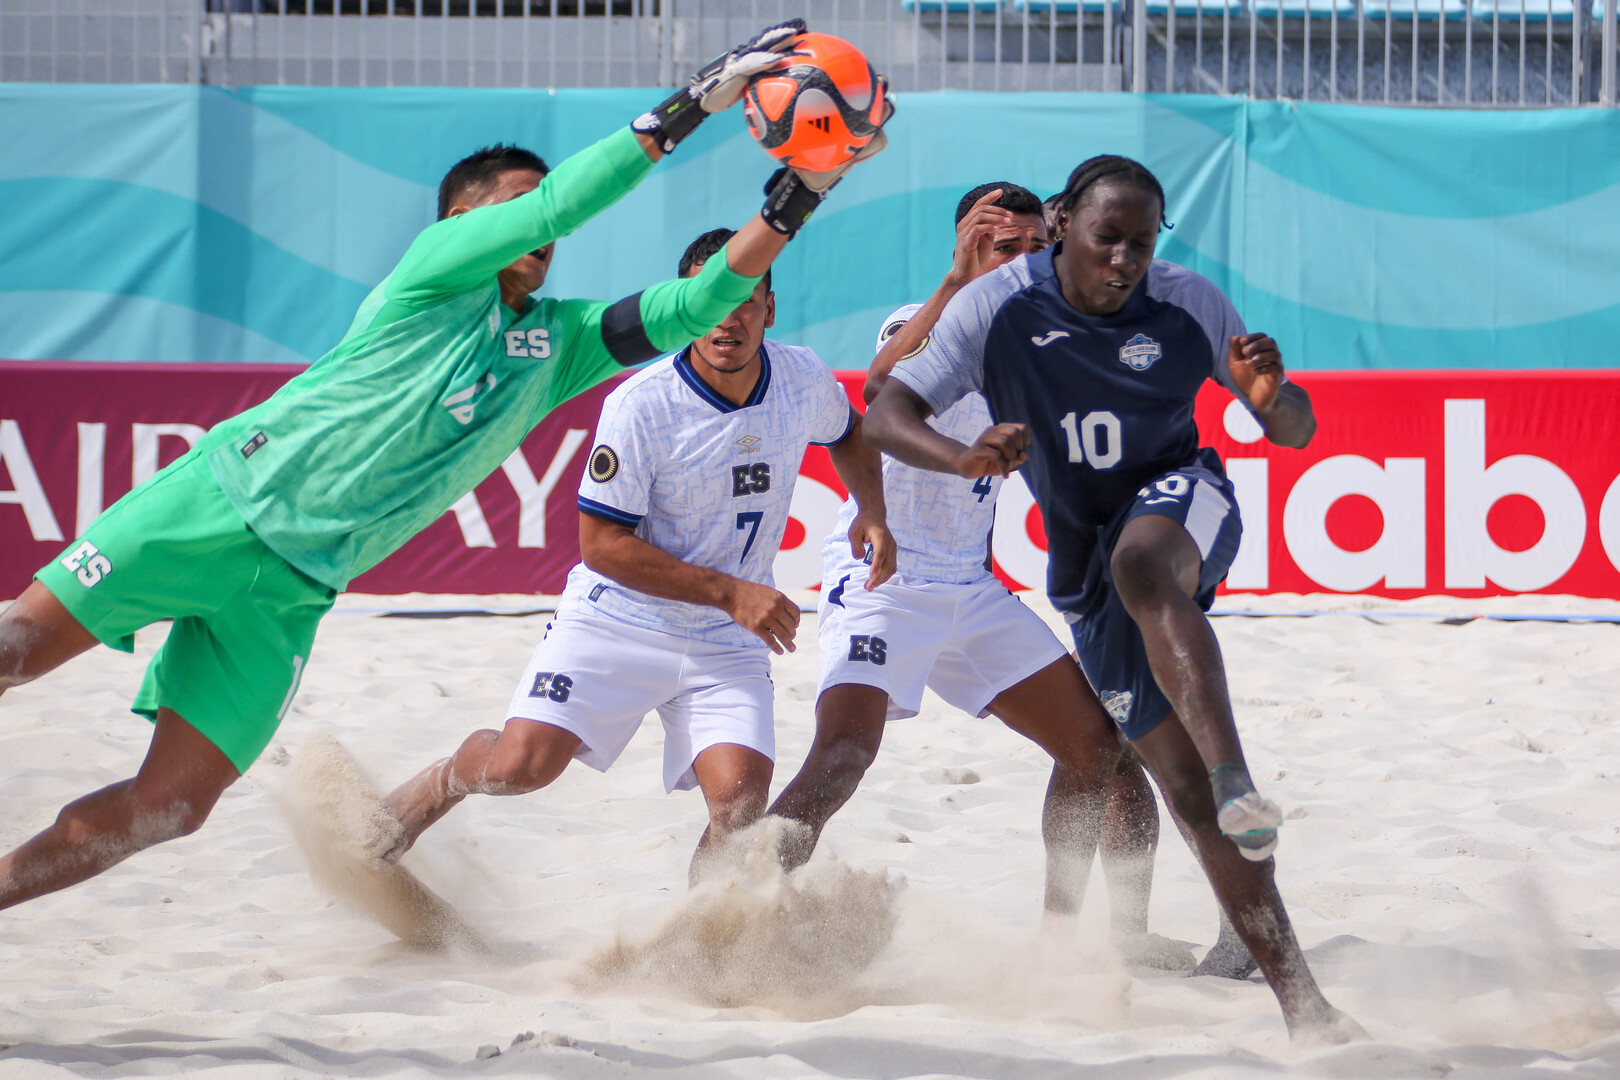 Argentinean championships kicked off this weekend – Beach Soccer Worldwide